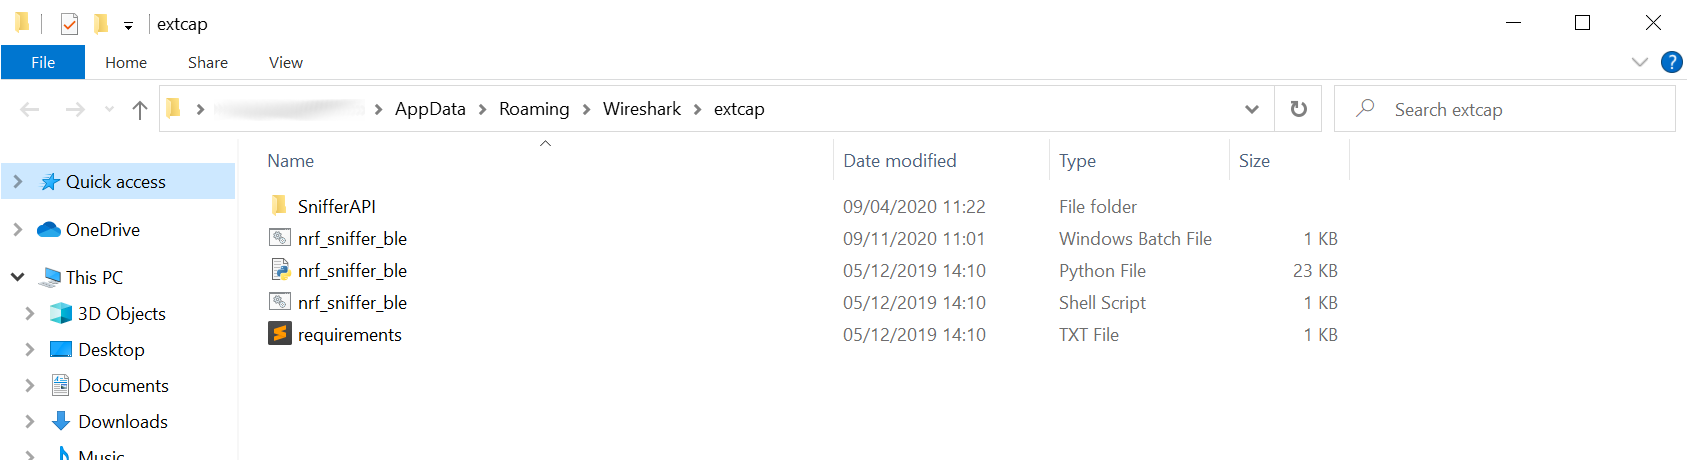 Screenshot showing the contents of the personal extcap folder